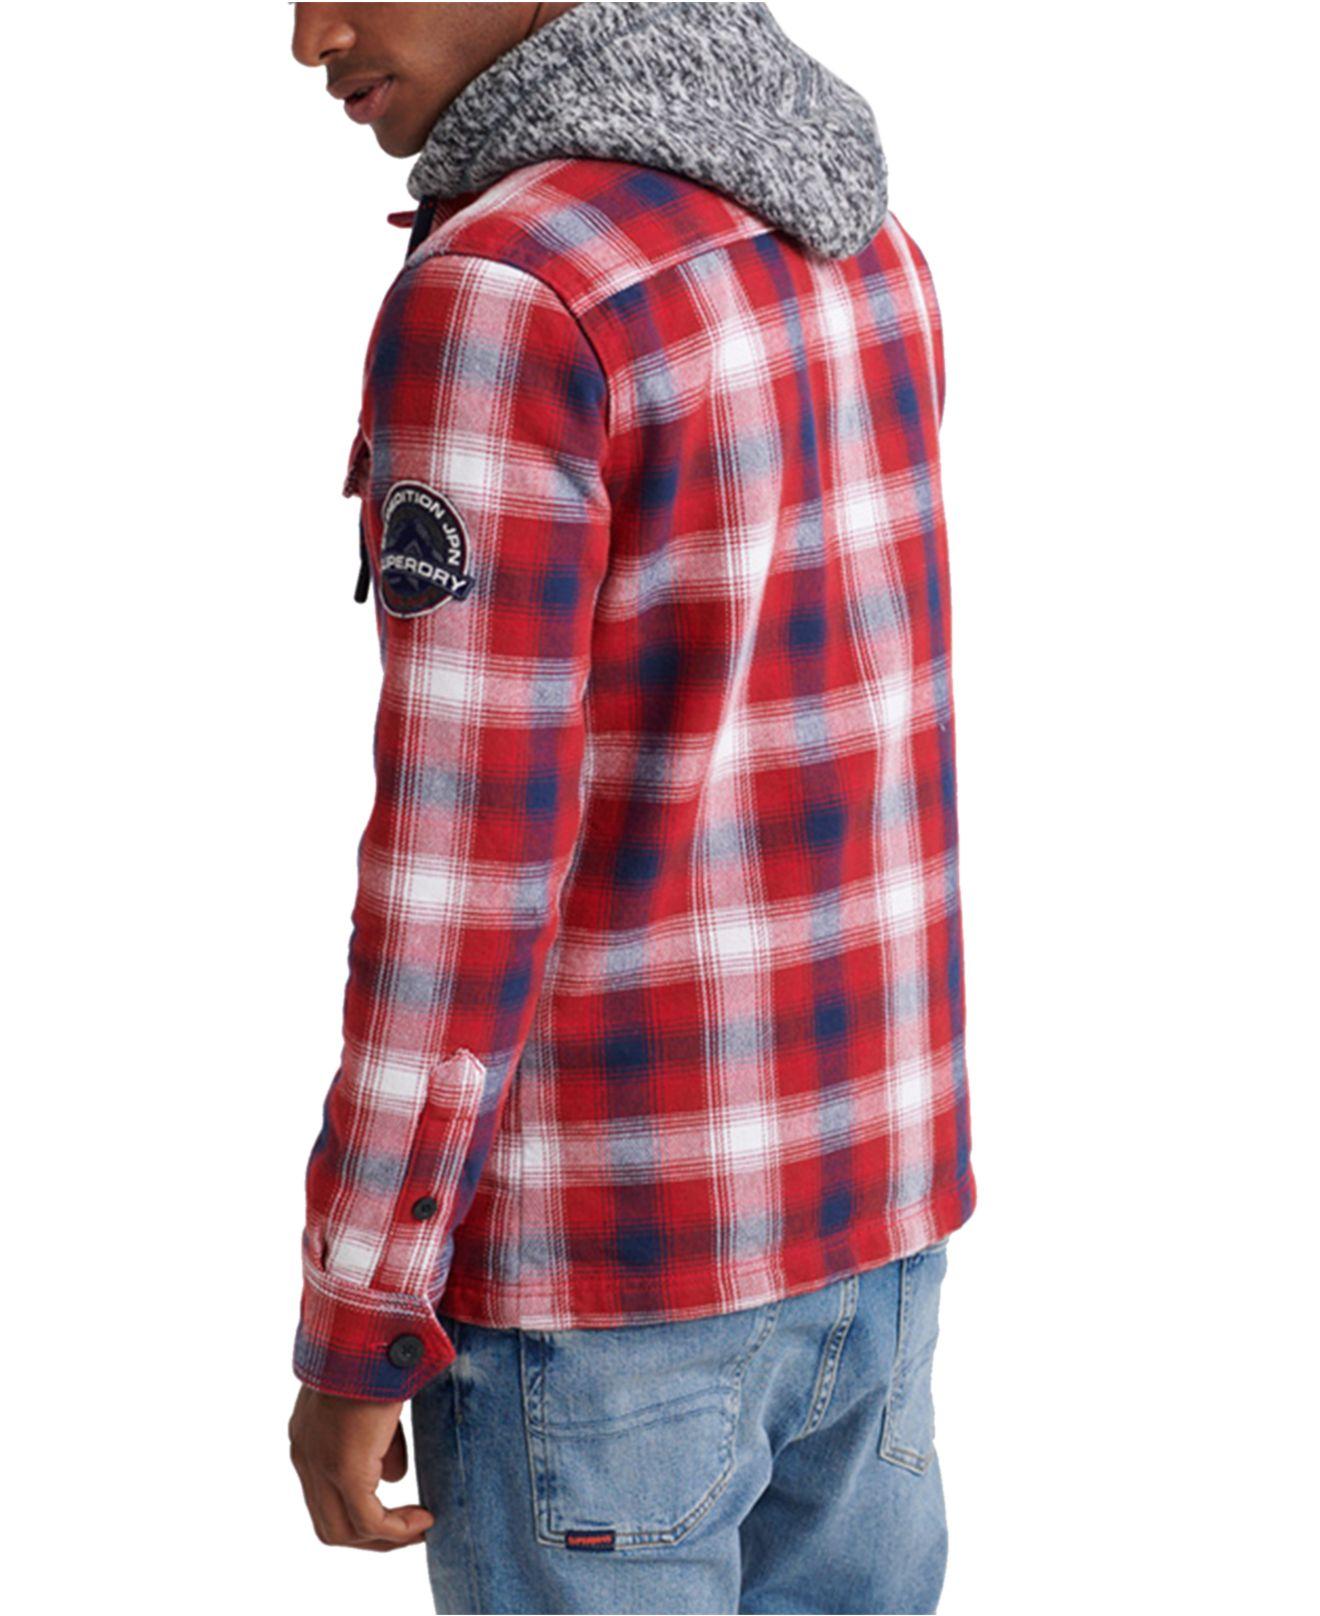 Superdry Everest Storm Hoodie in Red Check (Red) for Men - Lyst